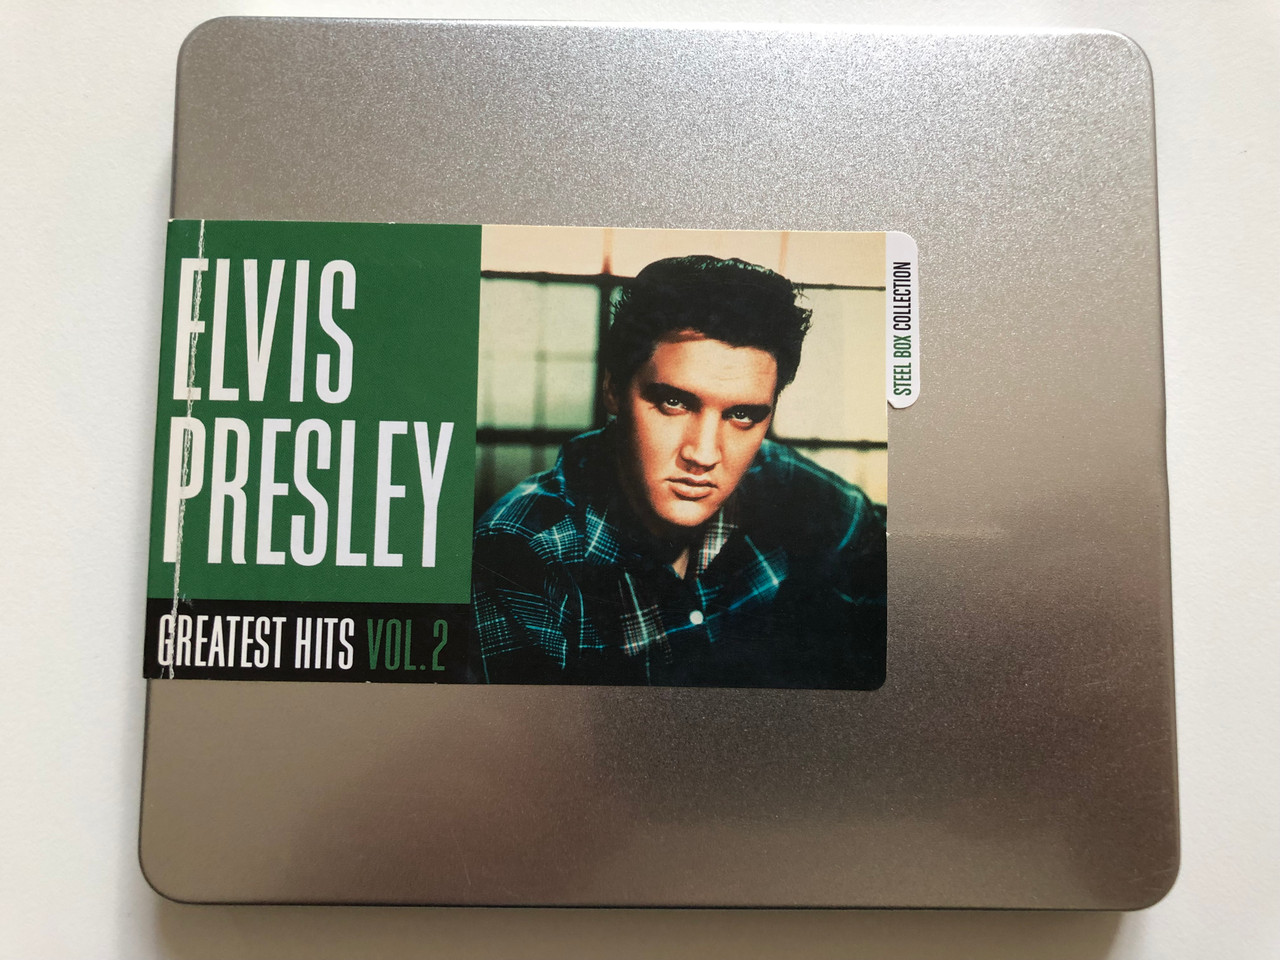 https://cdn10.bigcommerce.com/s-62bdpkt7pb/products/31019/images/182837/Elvis_Presley_Greatest_Hits_Vol.2_Steel_Box_Collection_Sony_Music_Audio_CD_2009_88697627562_1__43437.1624947747.1280.1280.JPG?c=2